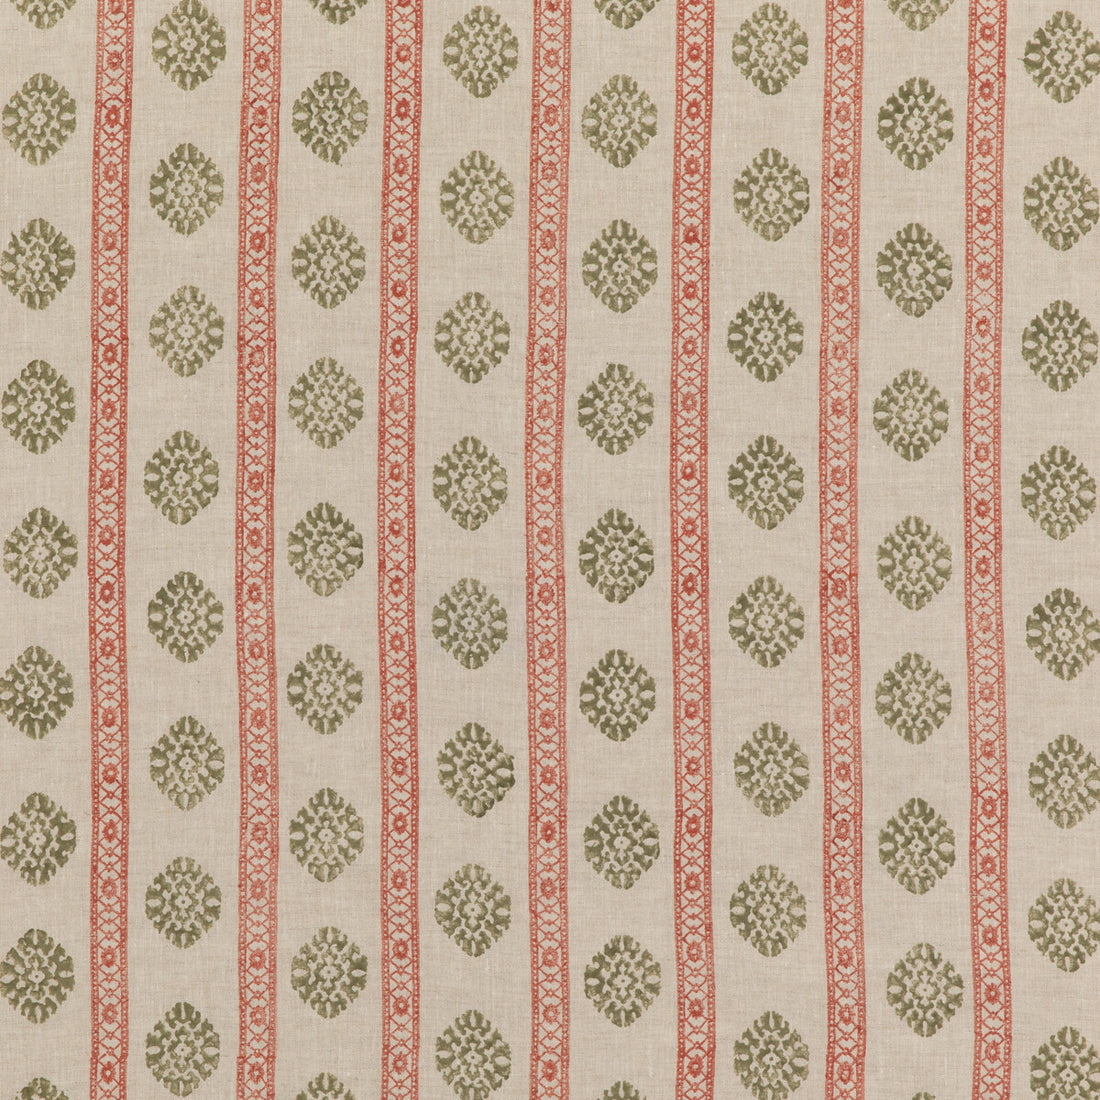 Alma fabric in red/green color - pattern BP10821.5.0 - by G P &amp; J Baker in the Coromandel Small Prints collection